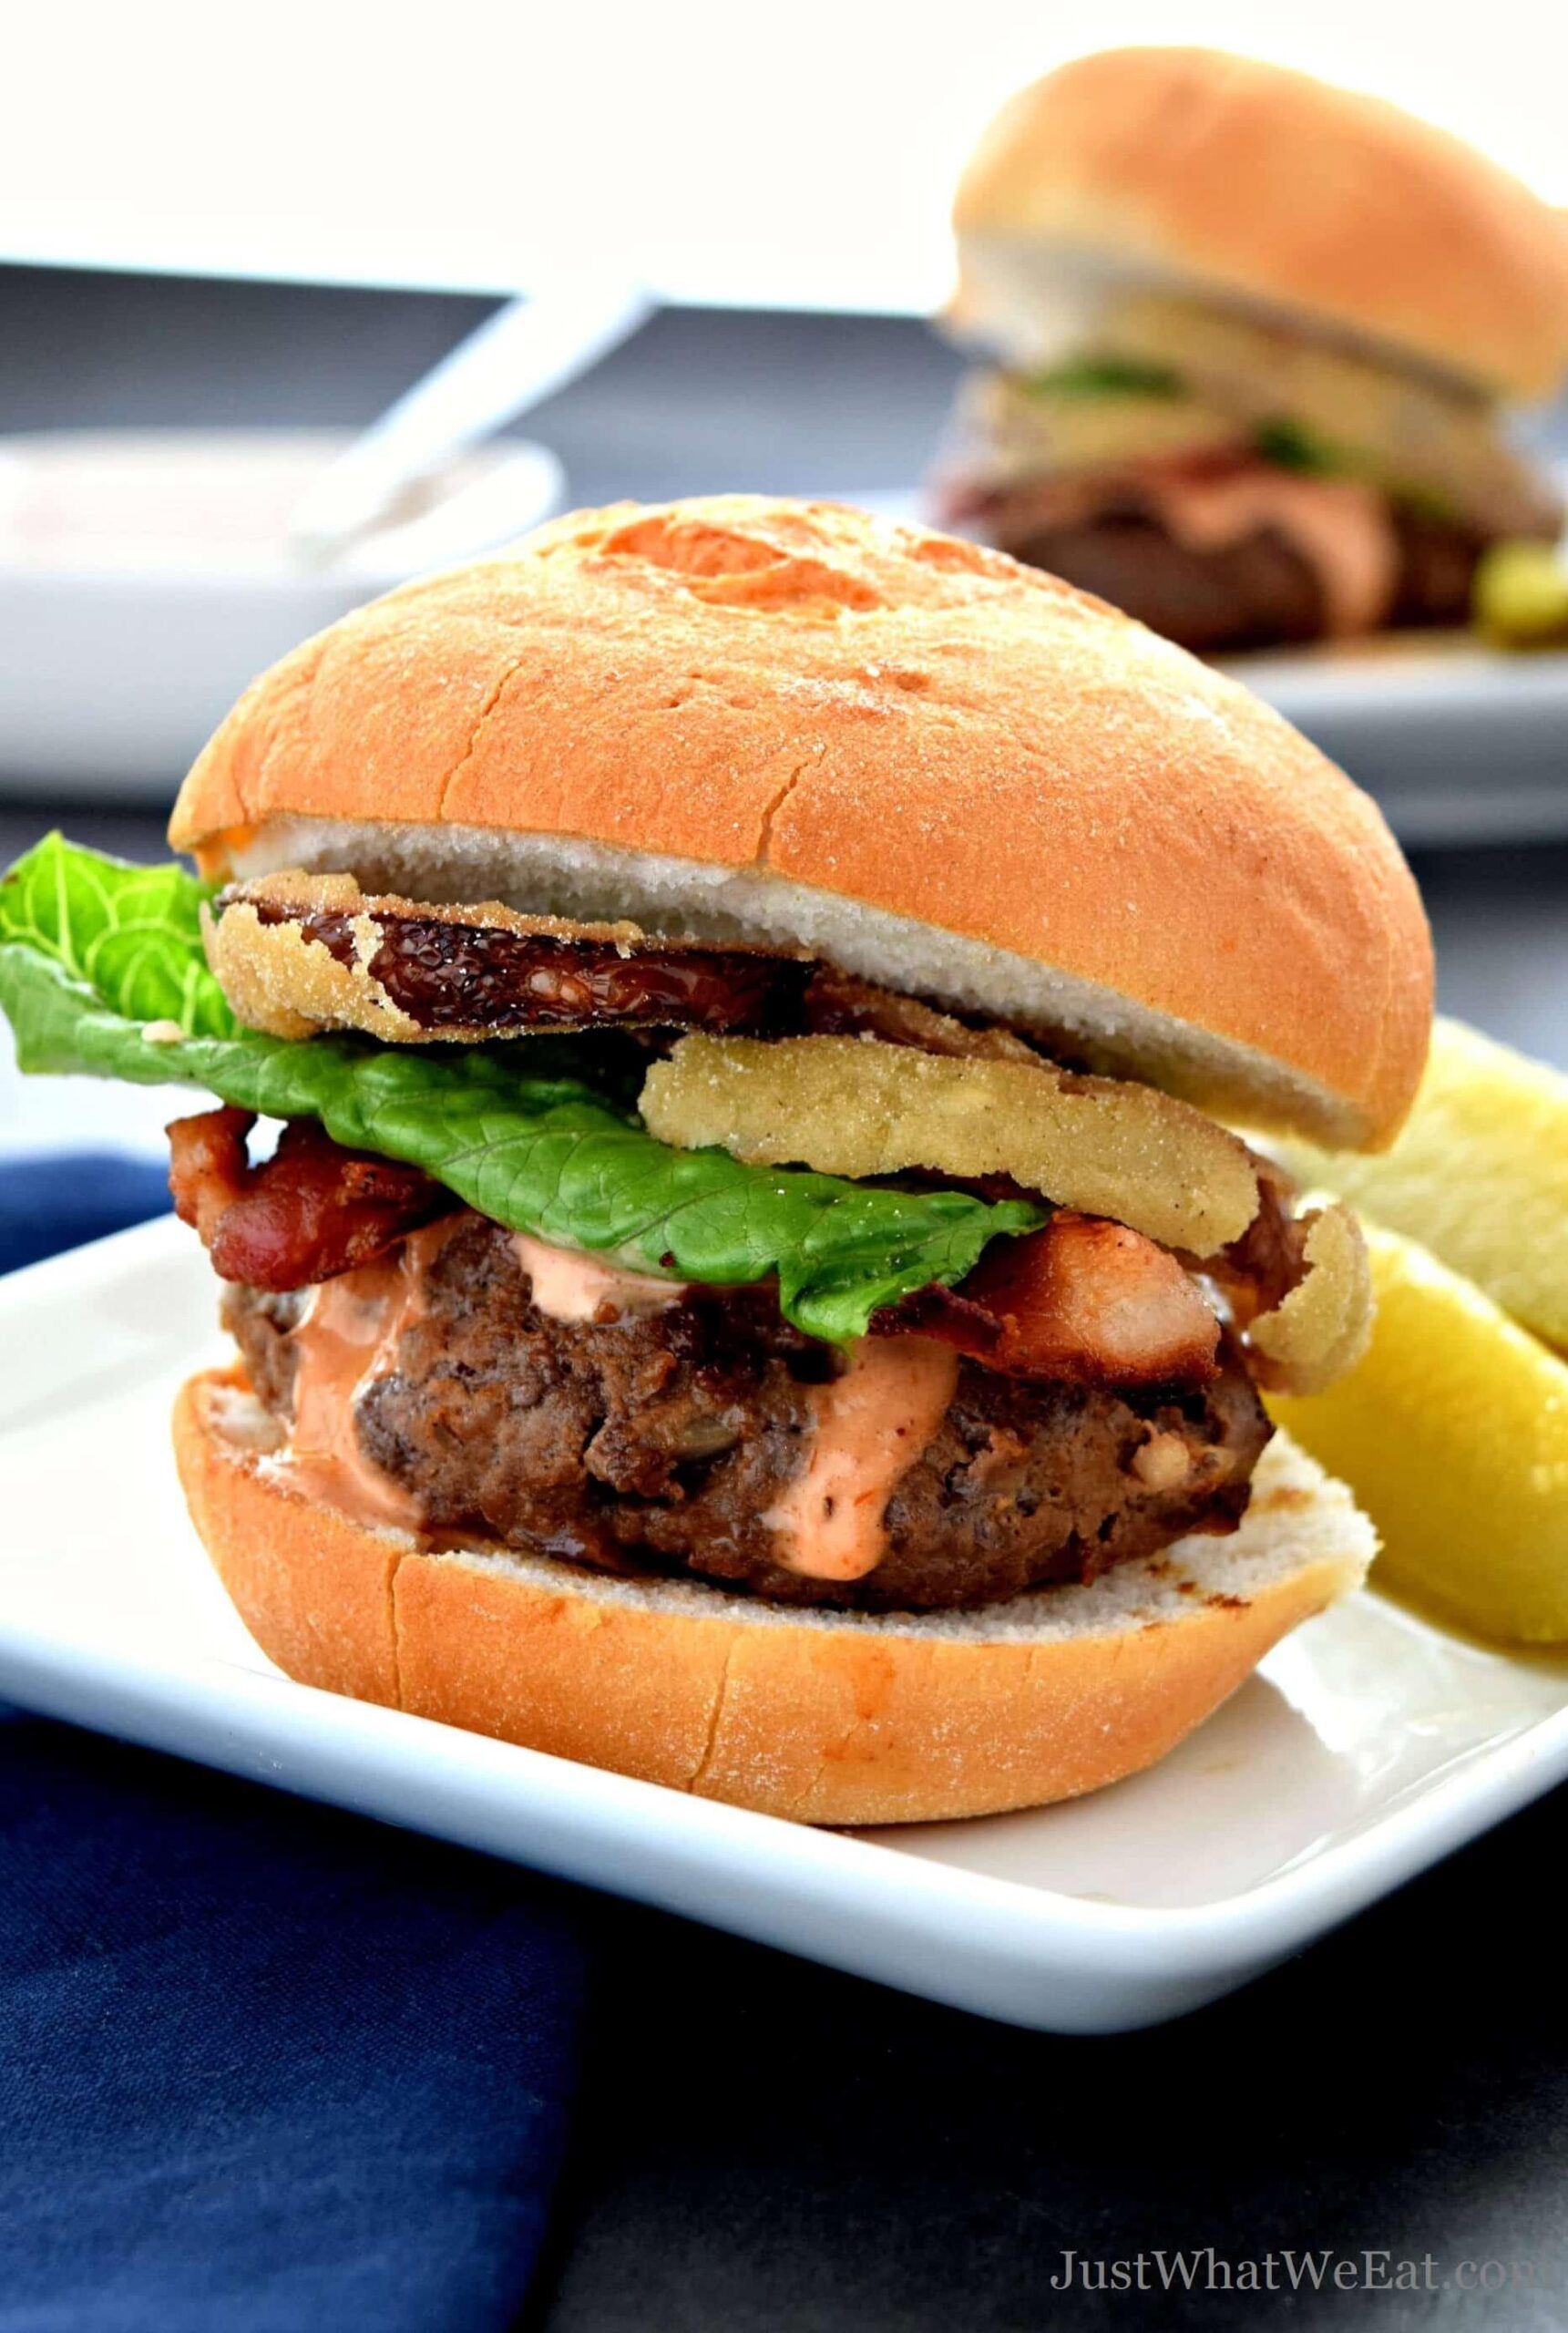  Who says gluten-free can't be tasty? These burgers are a game-changer.